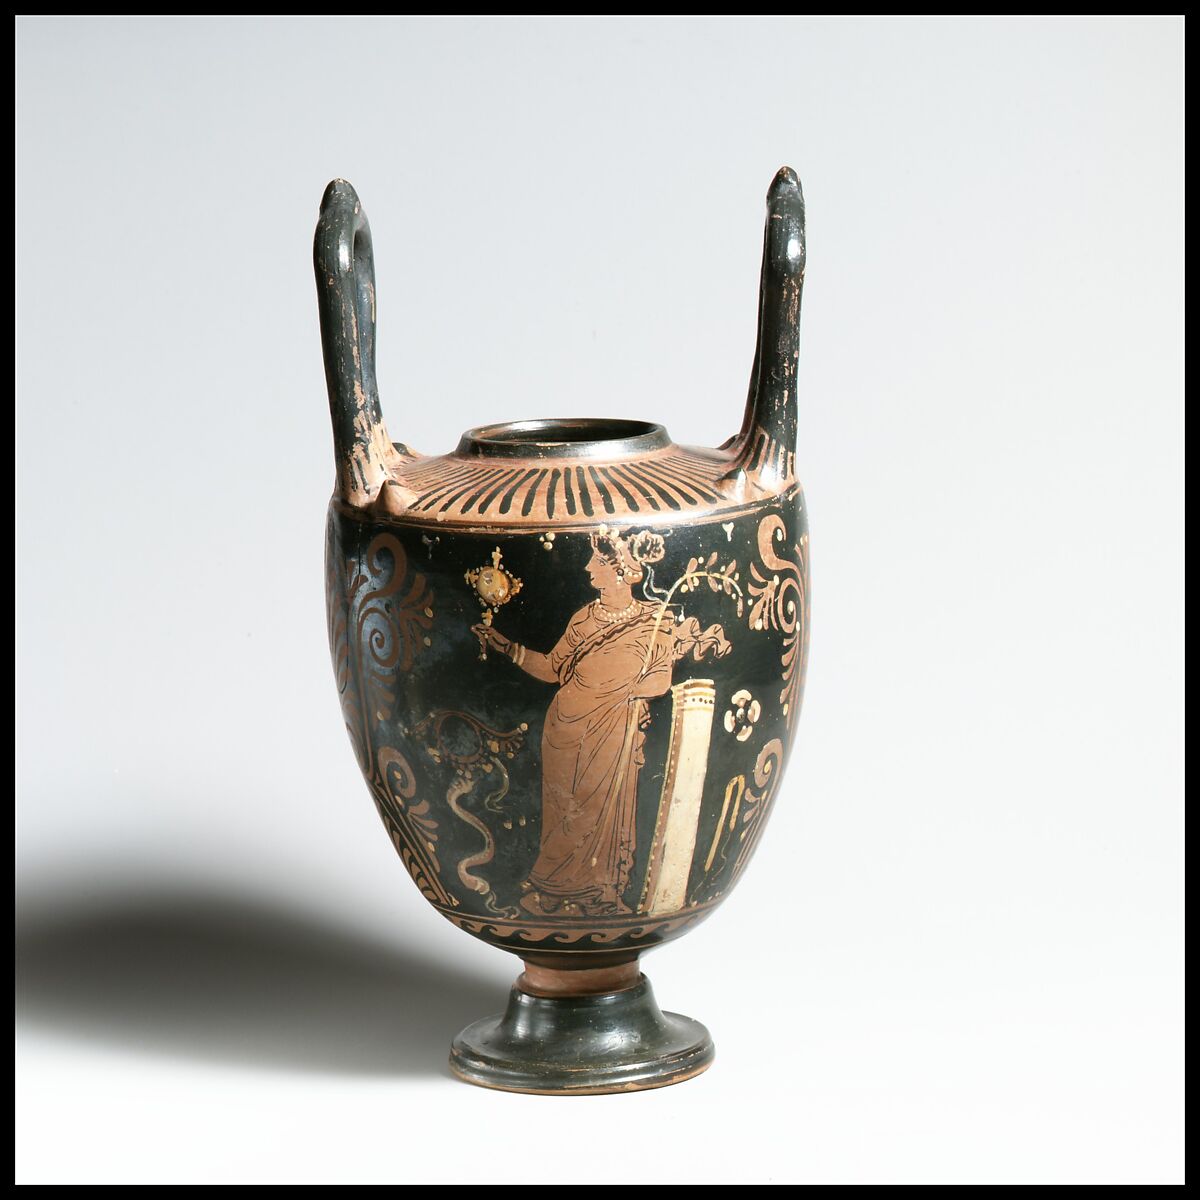 Lebes gamikos, Attributed to the Liverpool Group, Terracotta, Greek, South Italian, Apulian 